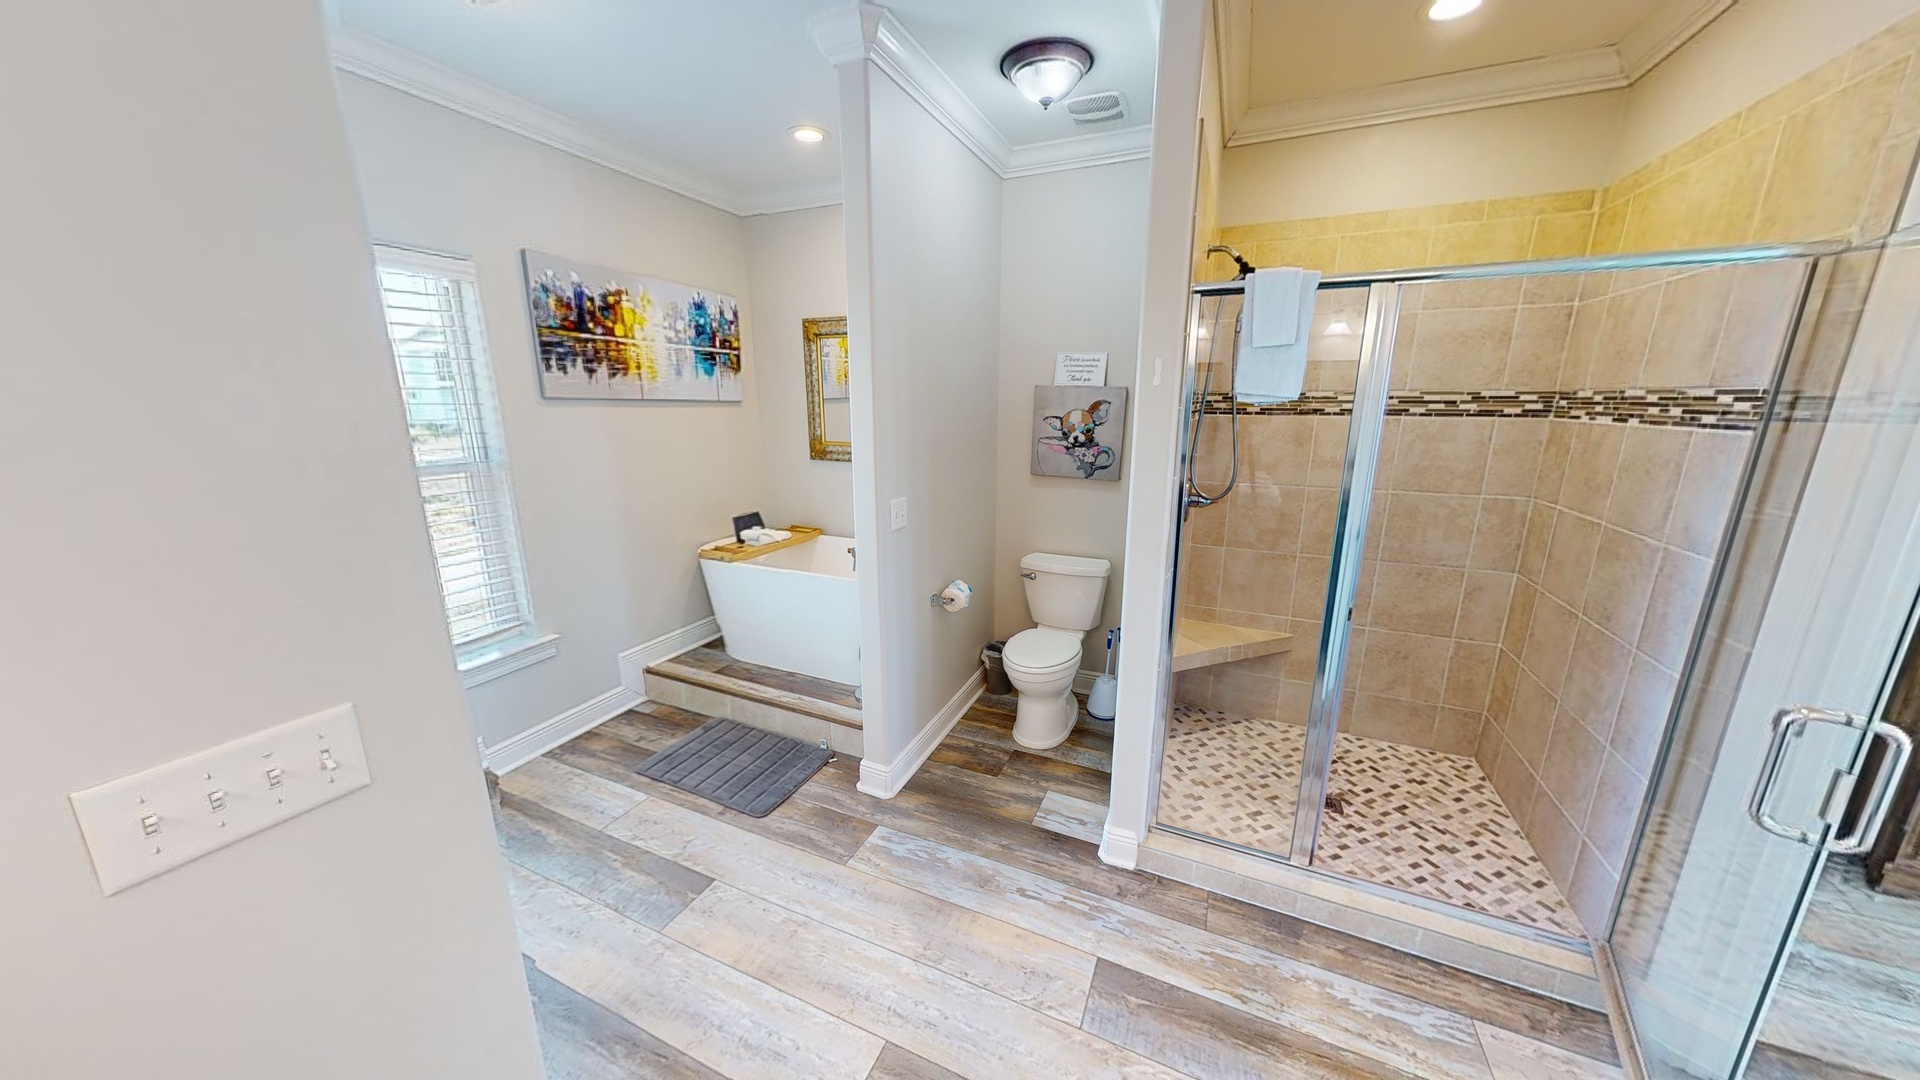 The private master bathroom features a walk-in shower and a soaking tub